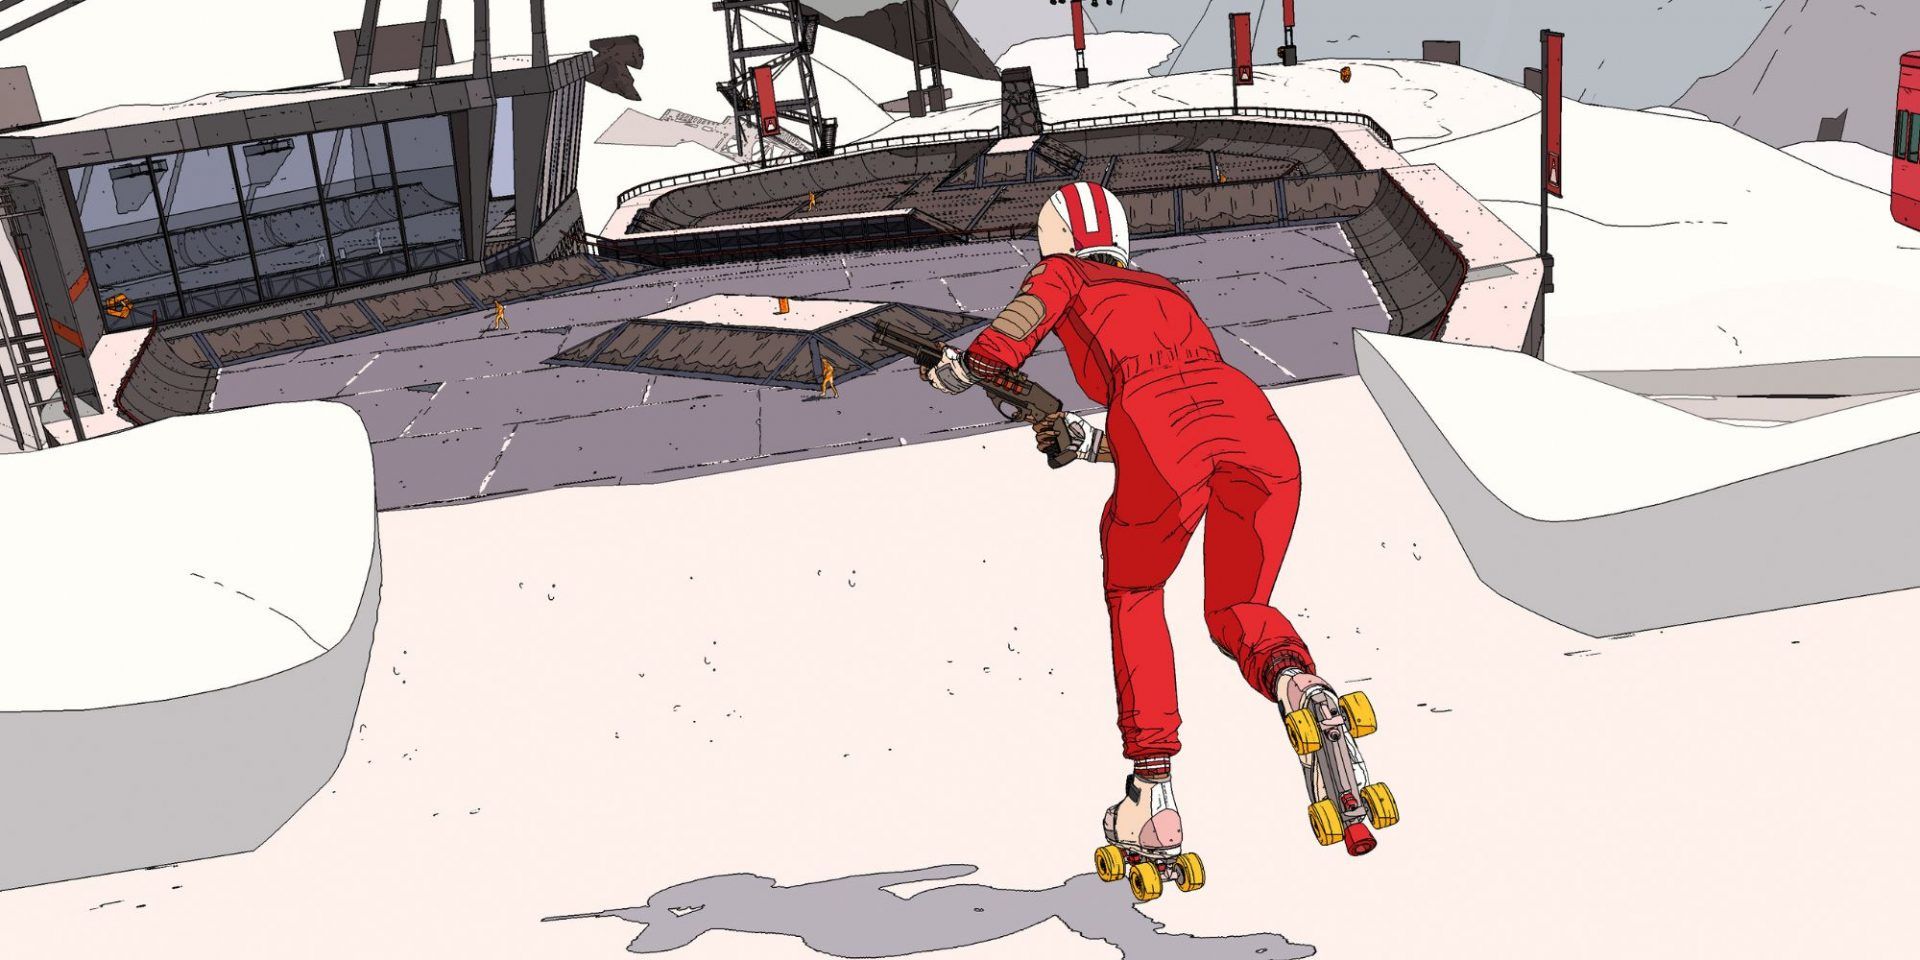 A screenshot of the player skating from Rollerdrome